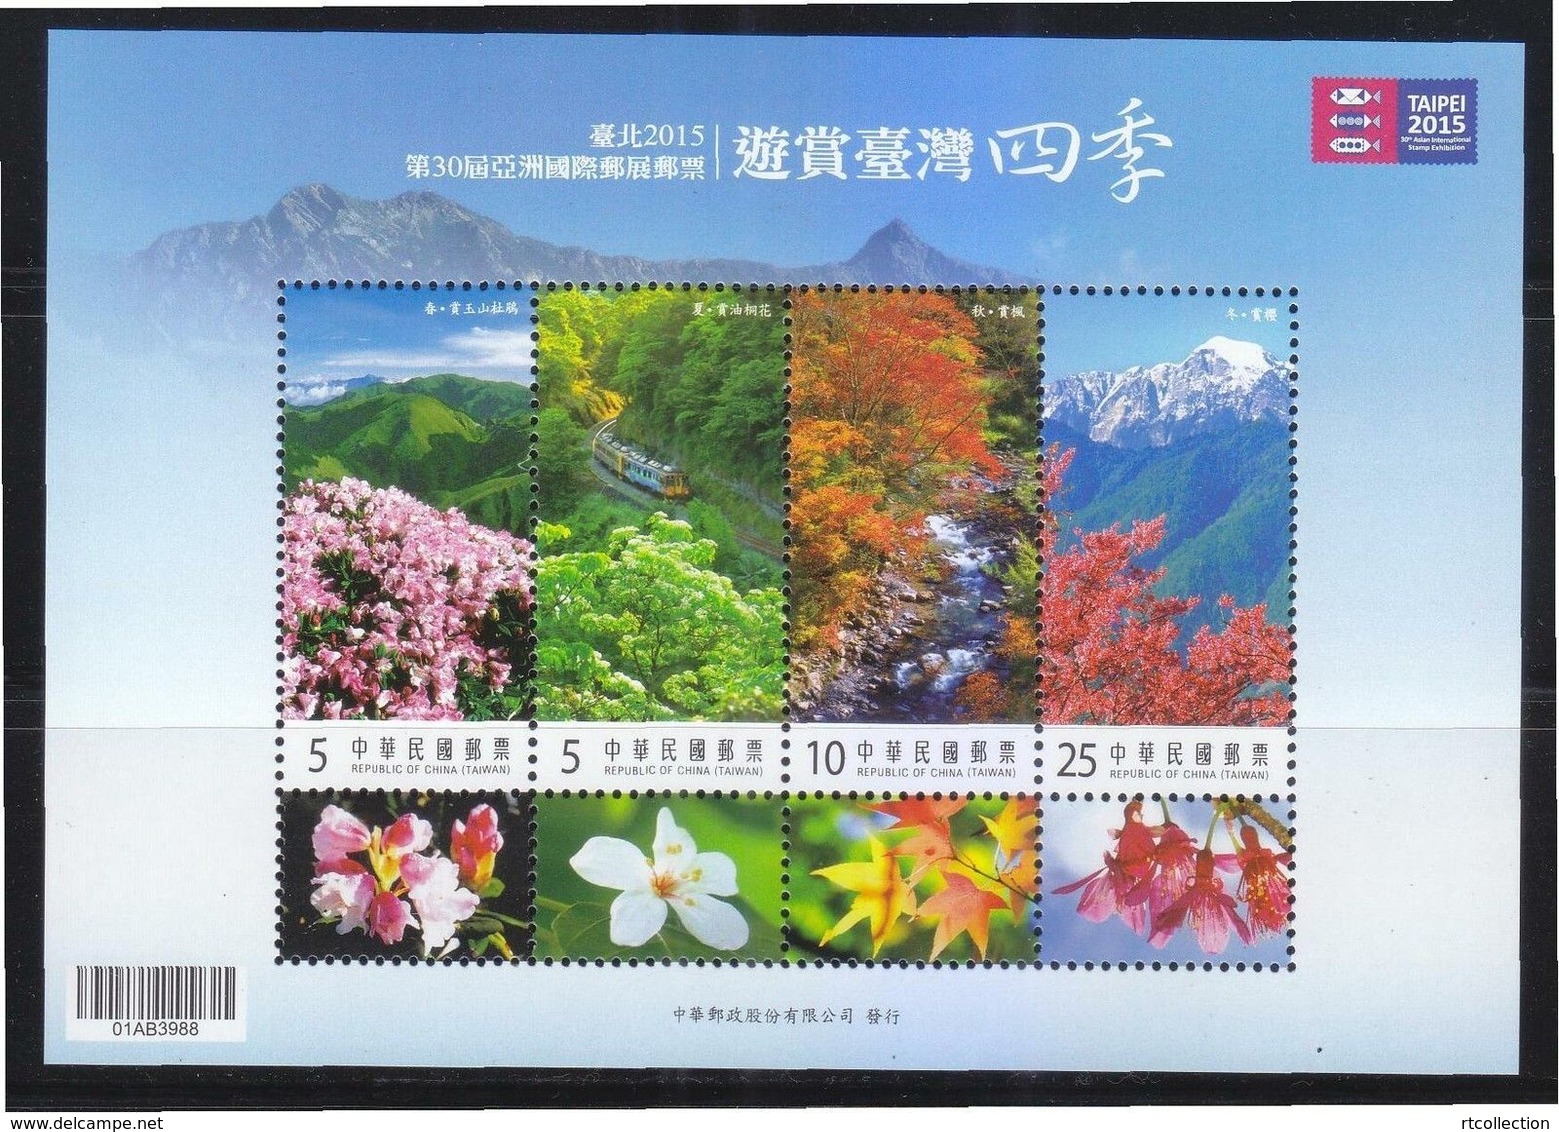 Taiwan 2014 M/S Four Seasons Intl Philatelic Exhibition TAIPEI 2015 Expo Flowers Landscape Flora China Plants Stamps MNH - Unused Stamps